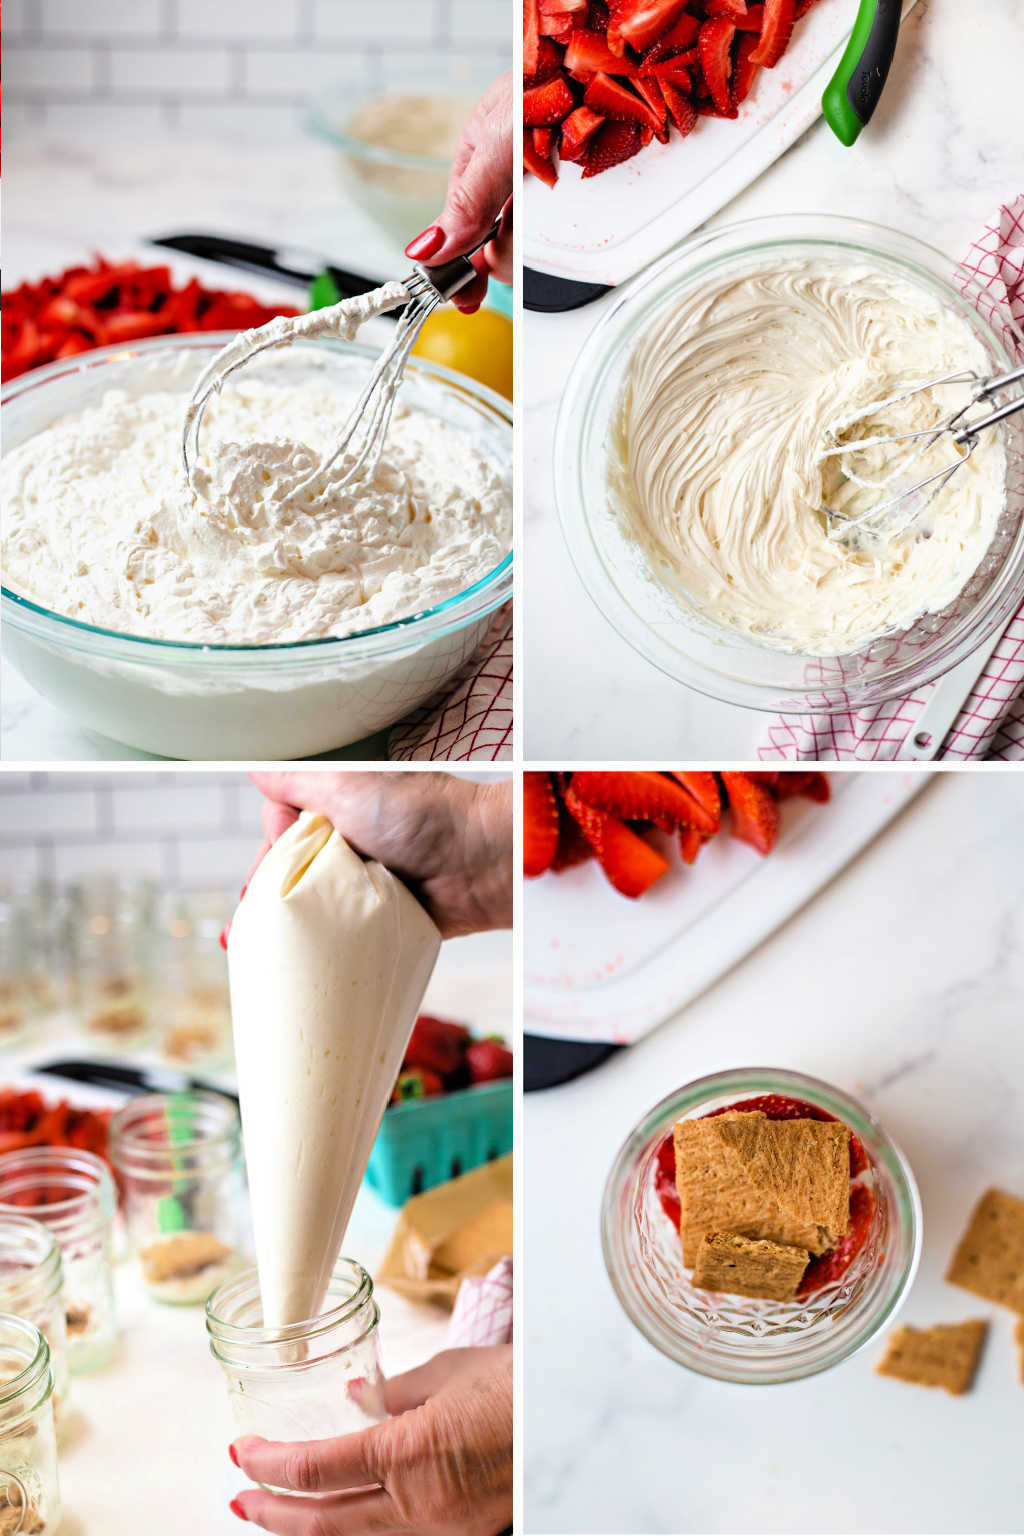 process steps for preparing strawberry ice box cake: 1) combine cream cheese, powdered sugar, and flavorings; 2) whip whipping cream; 3) pipe mixture into jars; 4) layer graham crackers on top of cream.